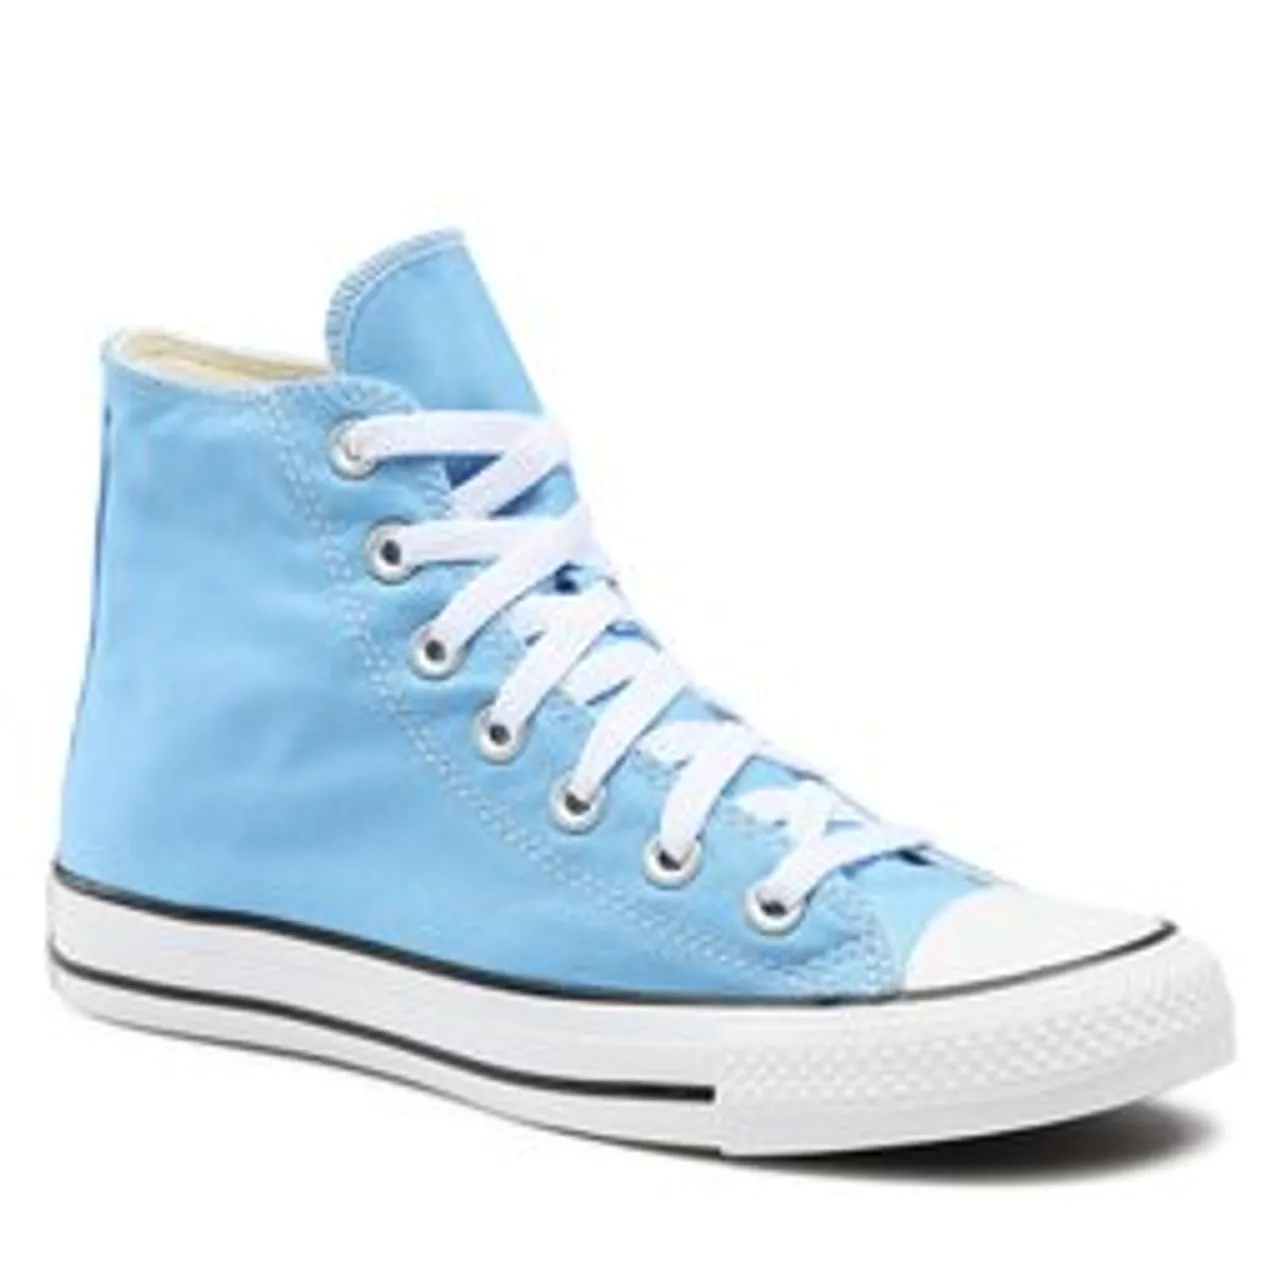 Sneakers aus Stoff Converse Chuck Taylor All Star A04541C Himmelblau